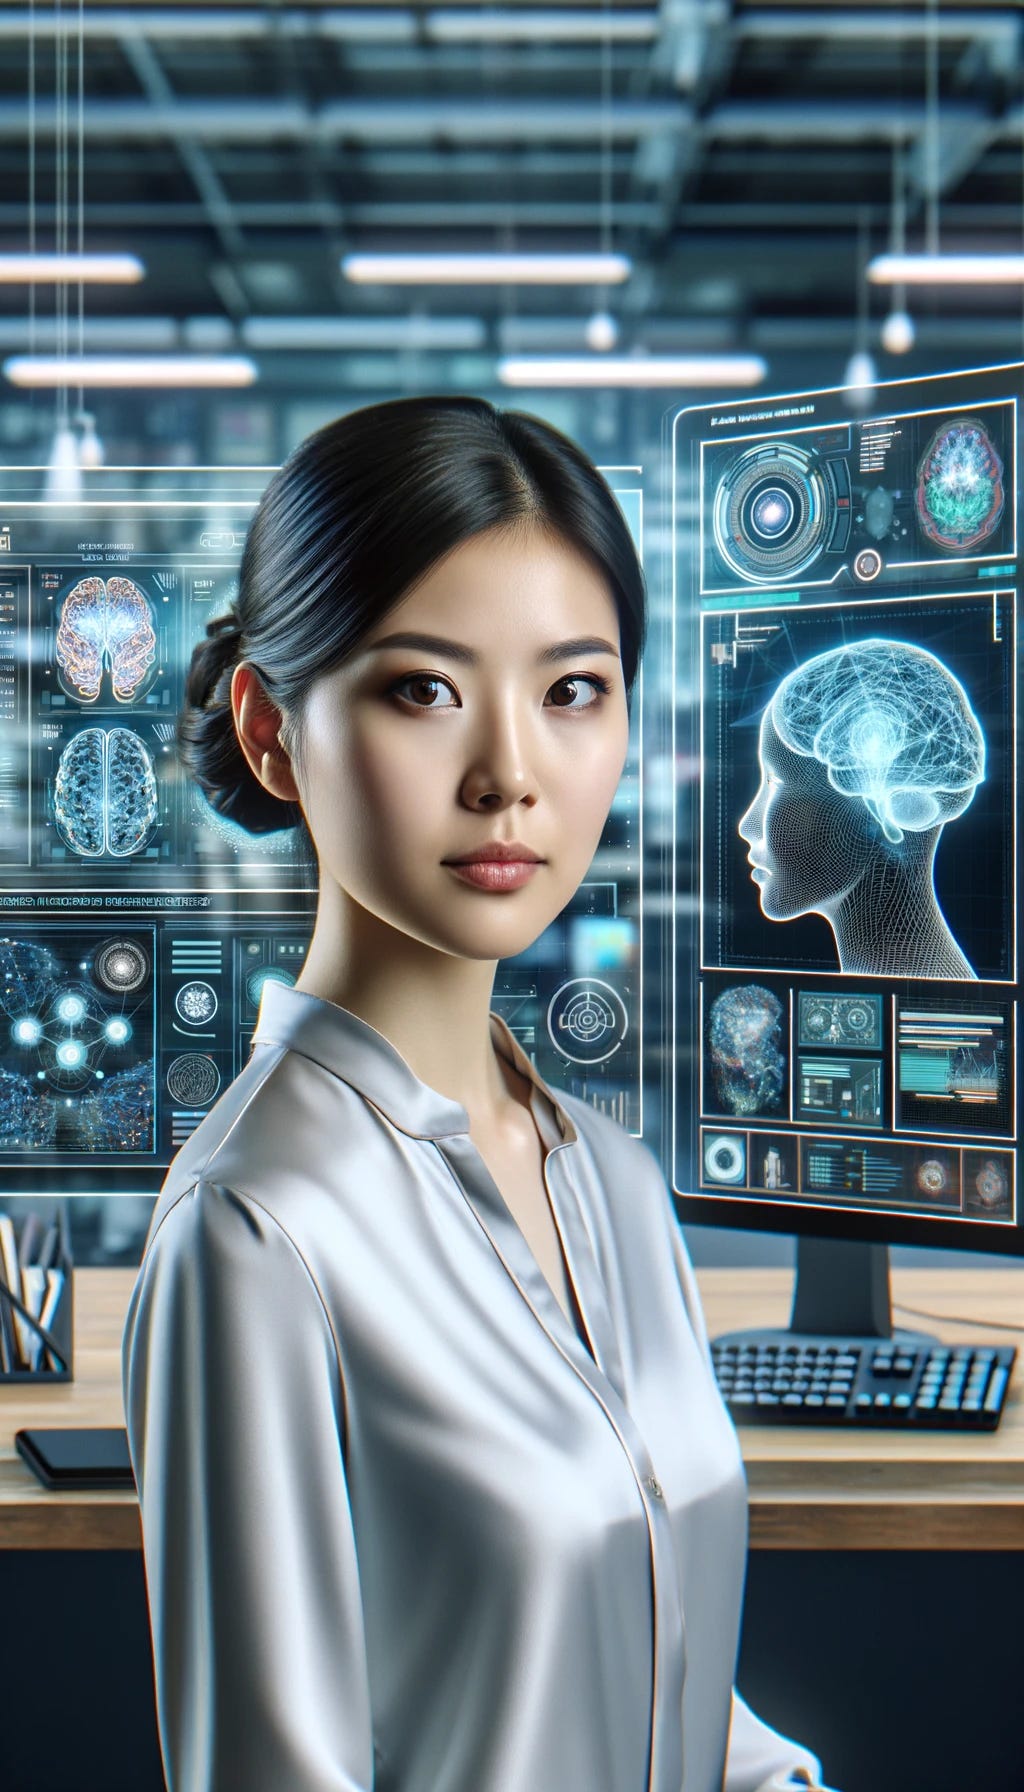 Portrait of a female Asian AI Psychologist in the same futuristic setting as previously depicted. The AI Psychologist is shown in a modern, high-tech office, exhibiting a focused and engaged expression while analyzing and optimizing AI behavior. The background remains consistent, featuring advanced computers and holographic displays illustrating complex neural networks and AI data analytics. Interactive 3D models of AI brains and screens displaying AI diagnostics and psychological patterns surround her. This portrait highlights the blend of technology and human insight in AI psychology.